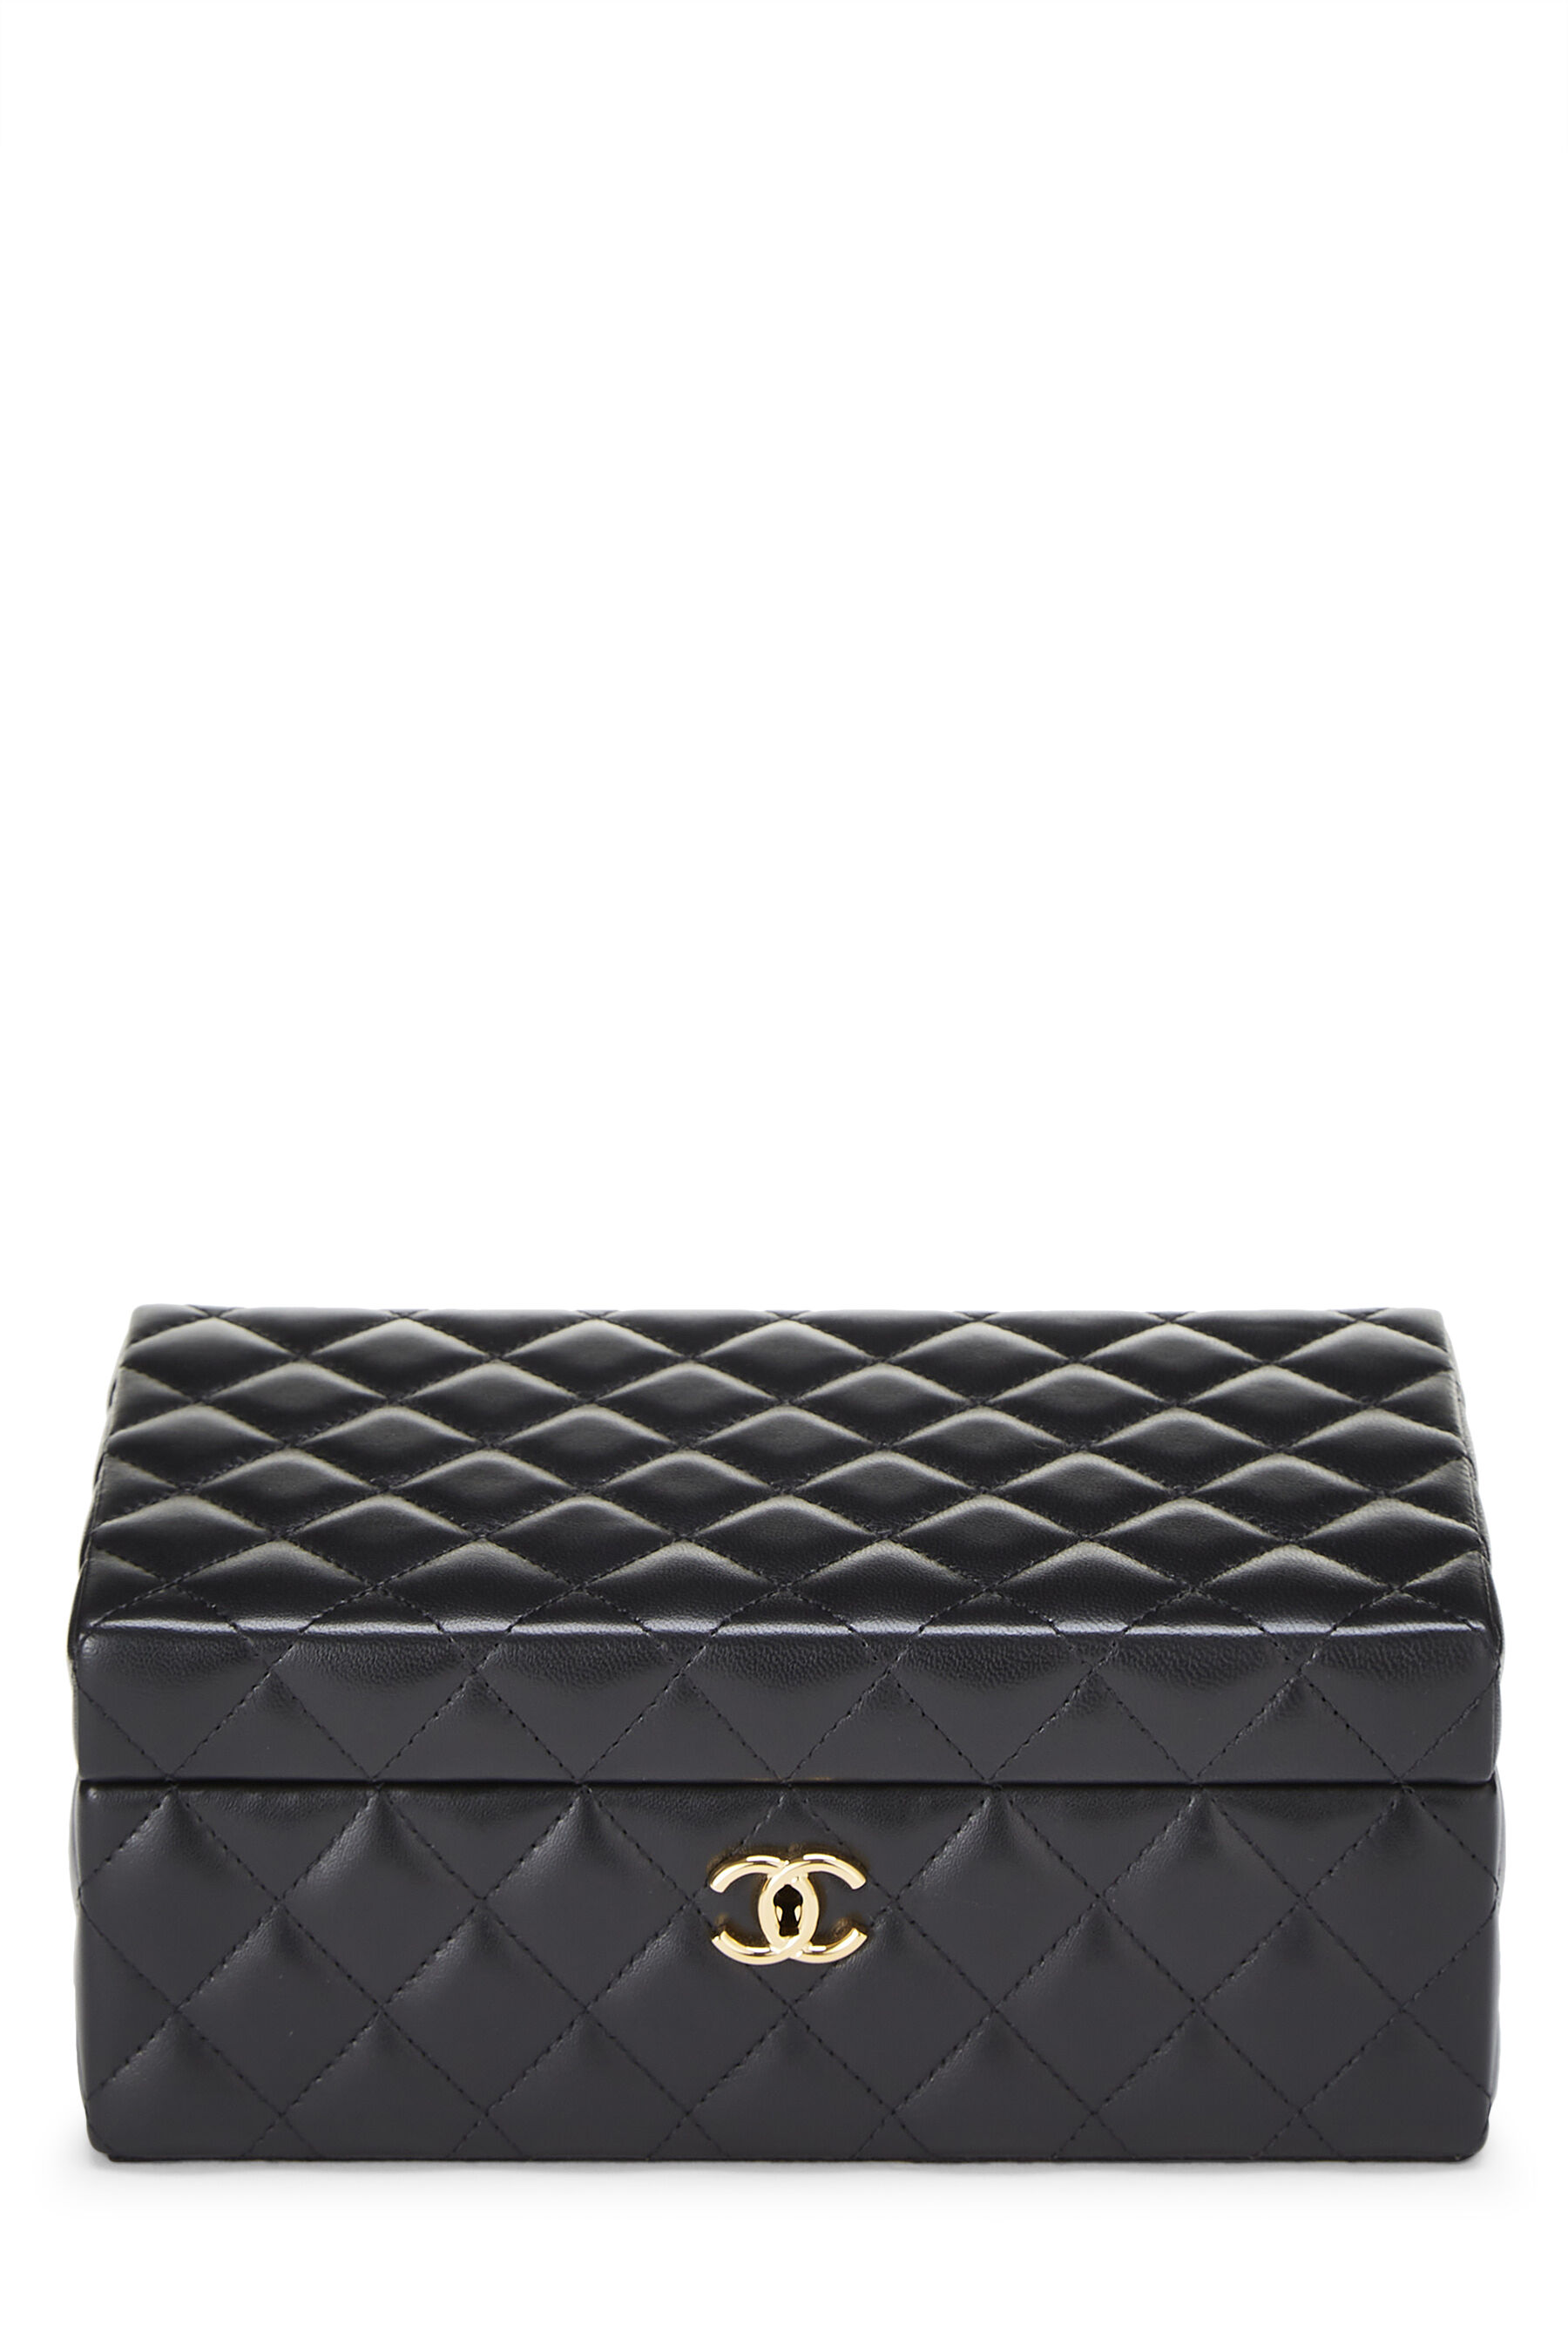 Chanel Black Lambskin Leather Quilted Jewelry Case Travel Bag